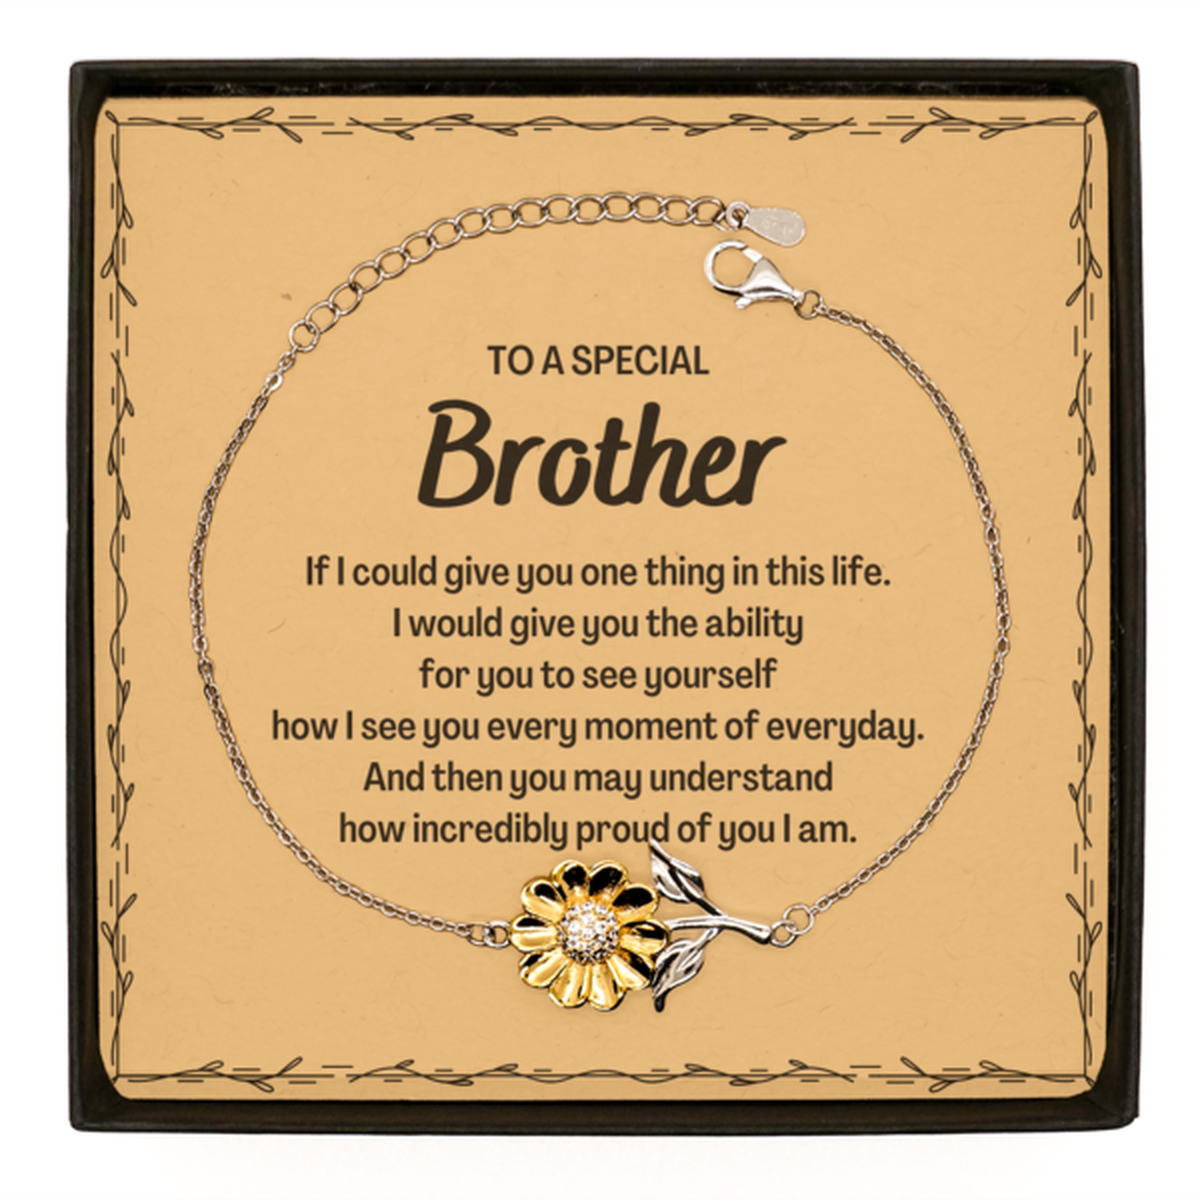 To My Brother Sunflower Bracelet, Gifts For Brother Message Card, Inspirational Gifts for Christmas Birthday, Epic Gifts for Brother To A Special Brother how incredibly proud of you I am